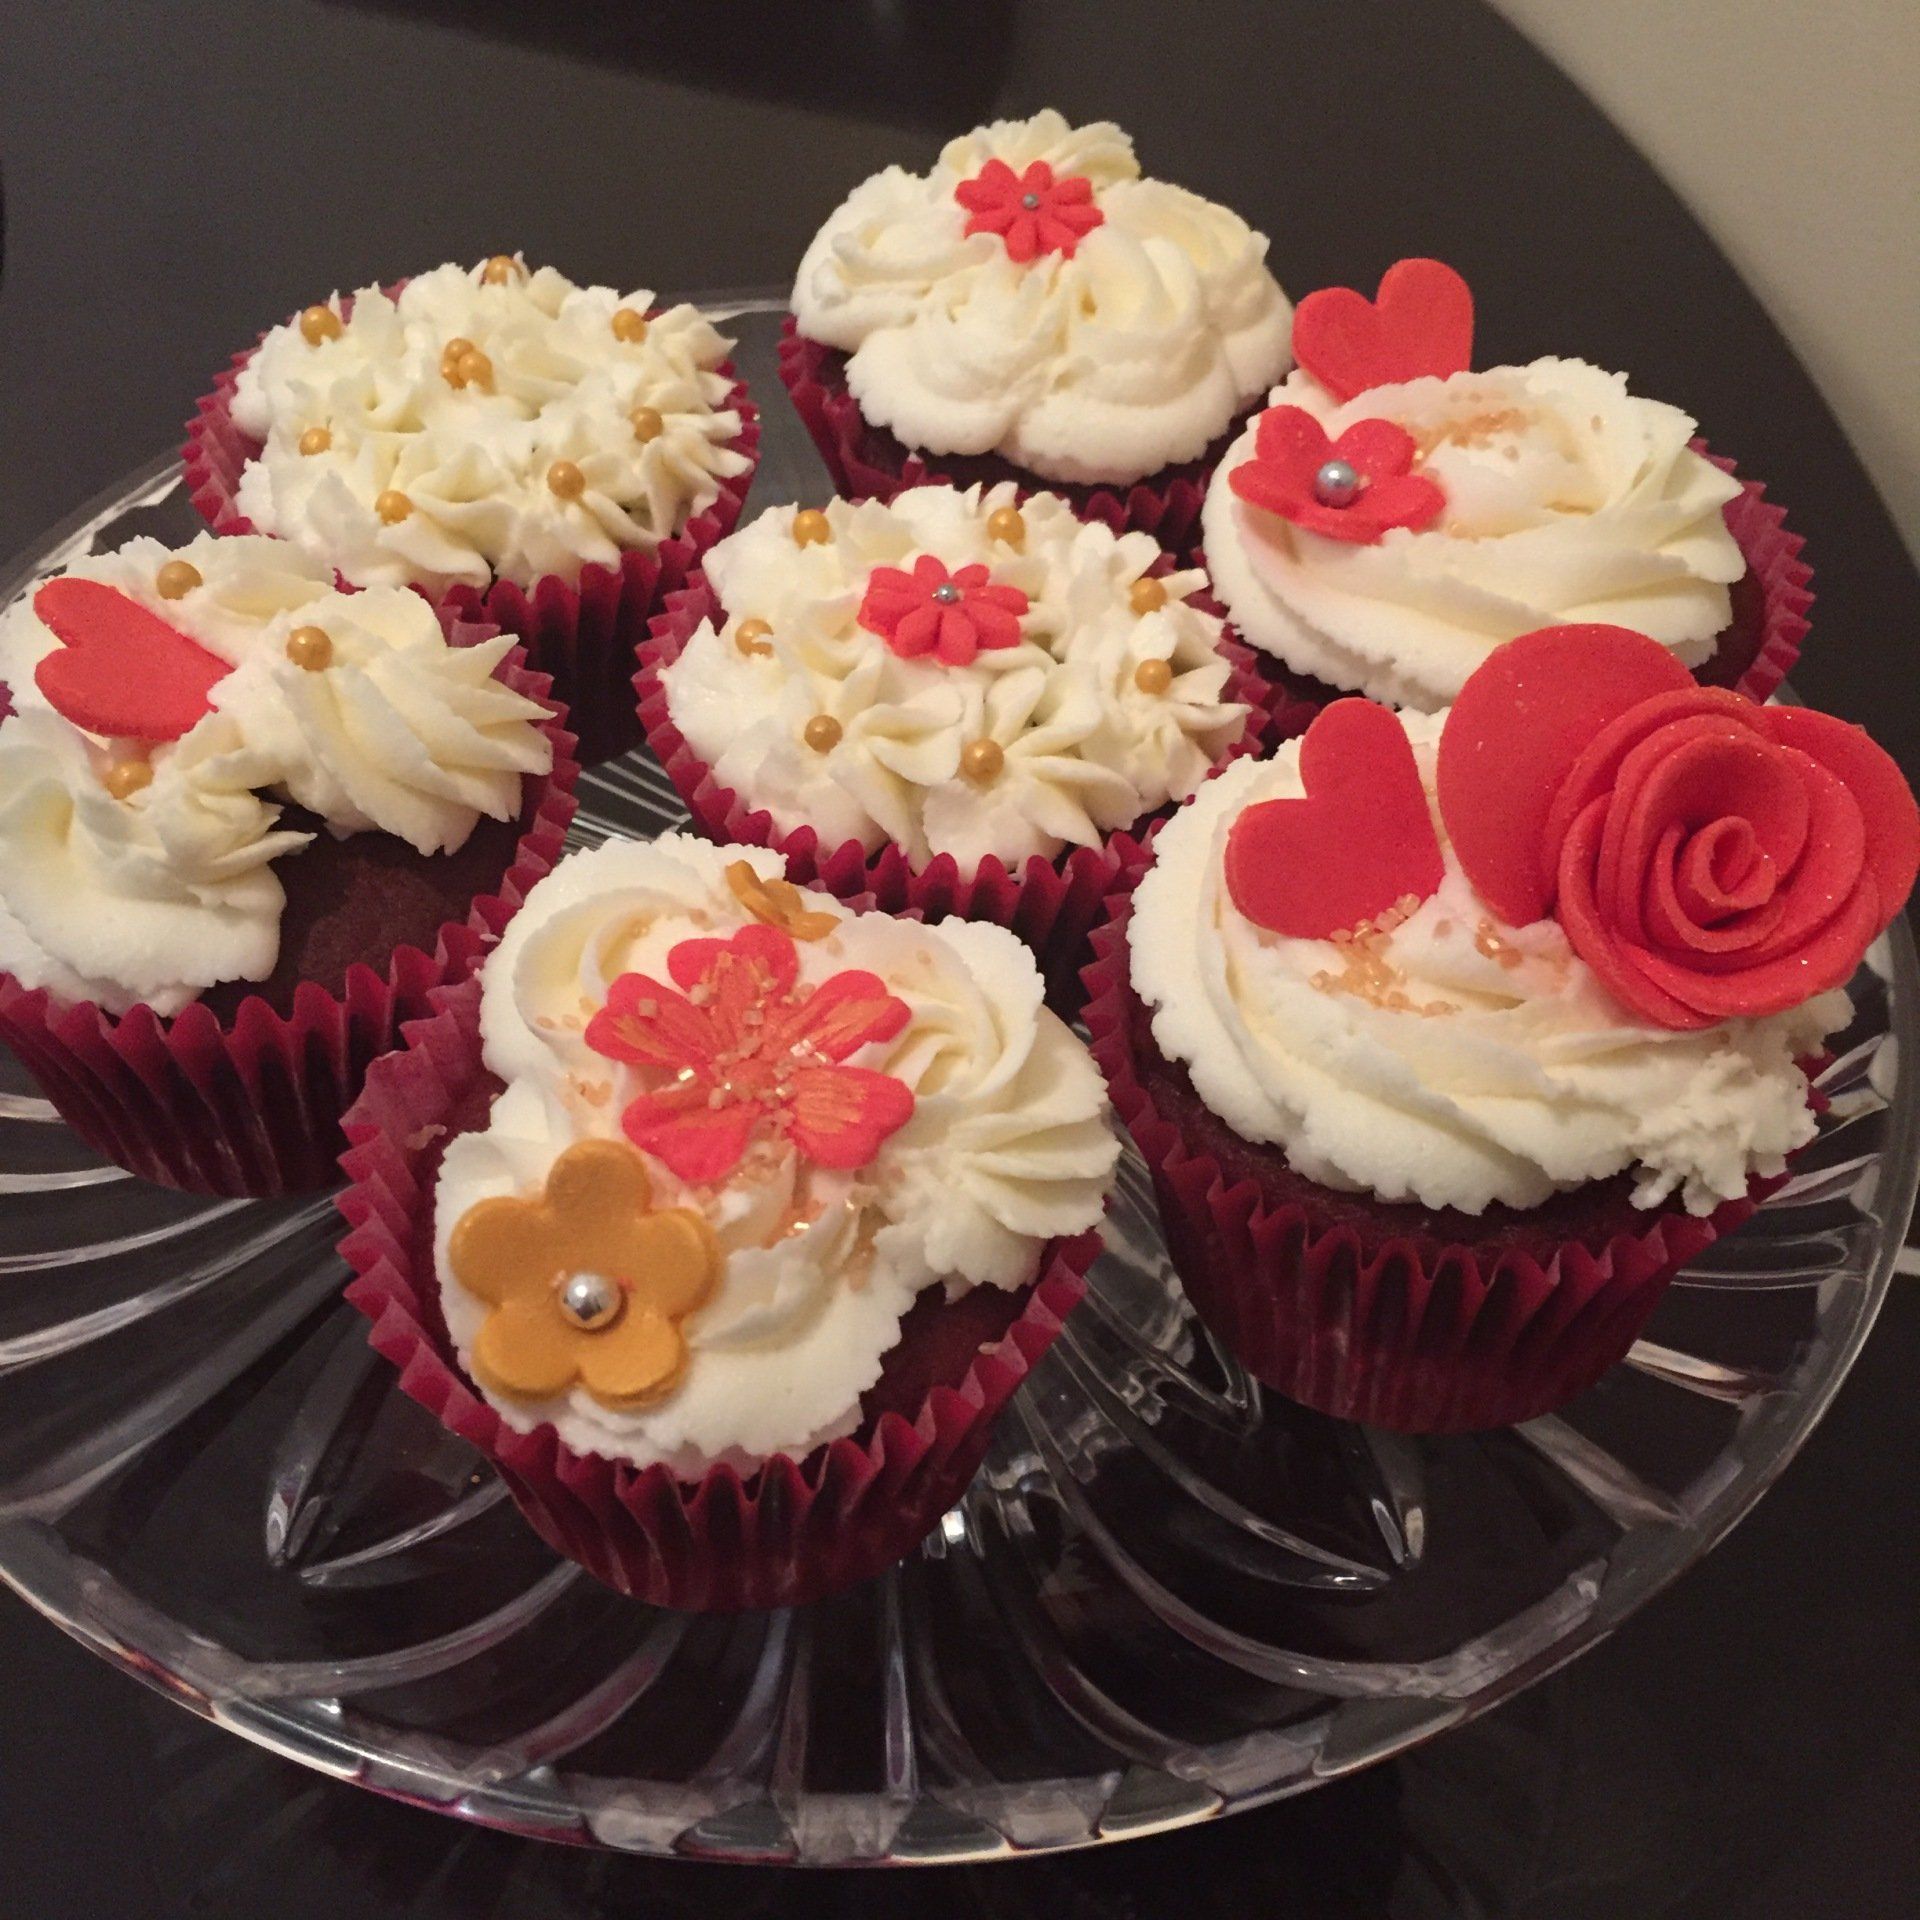 red velvet cup cakes